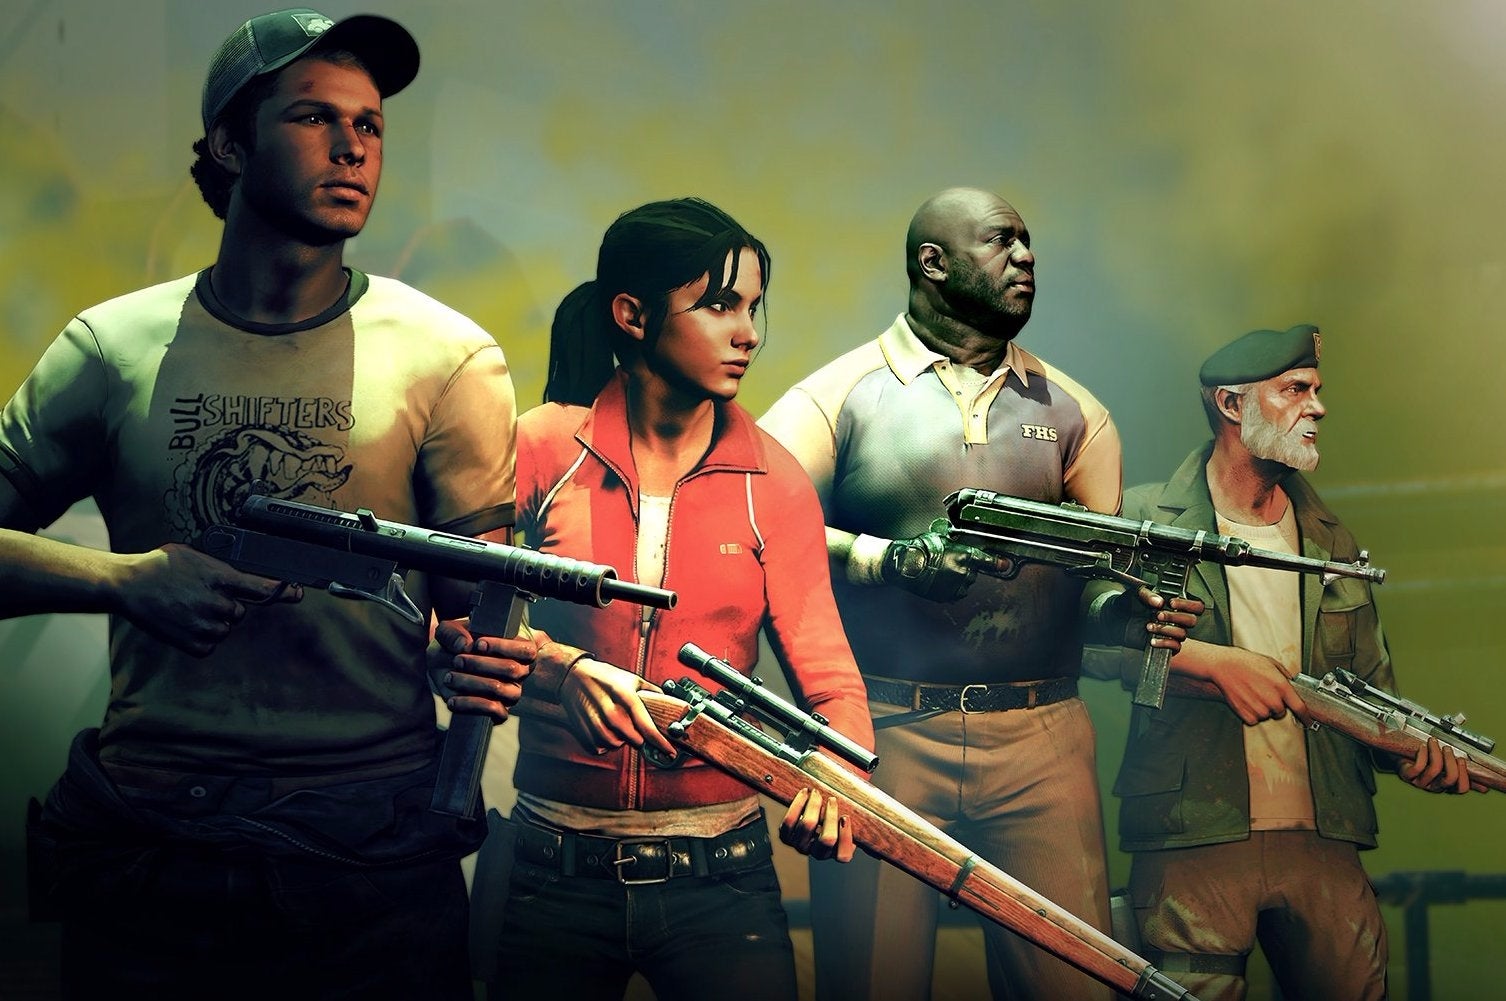 Image for Left 4 Dead characters join Zombie Army Trilogy